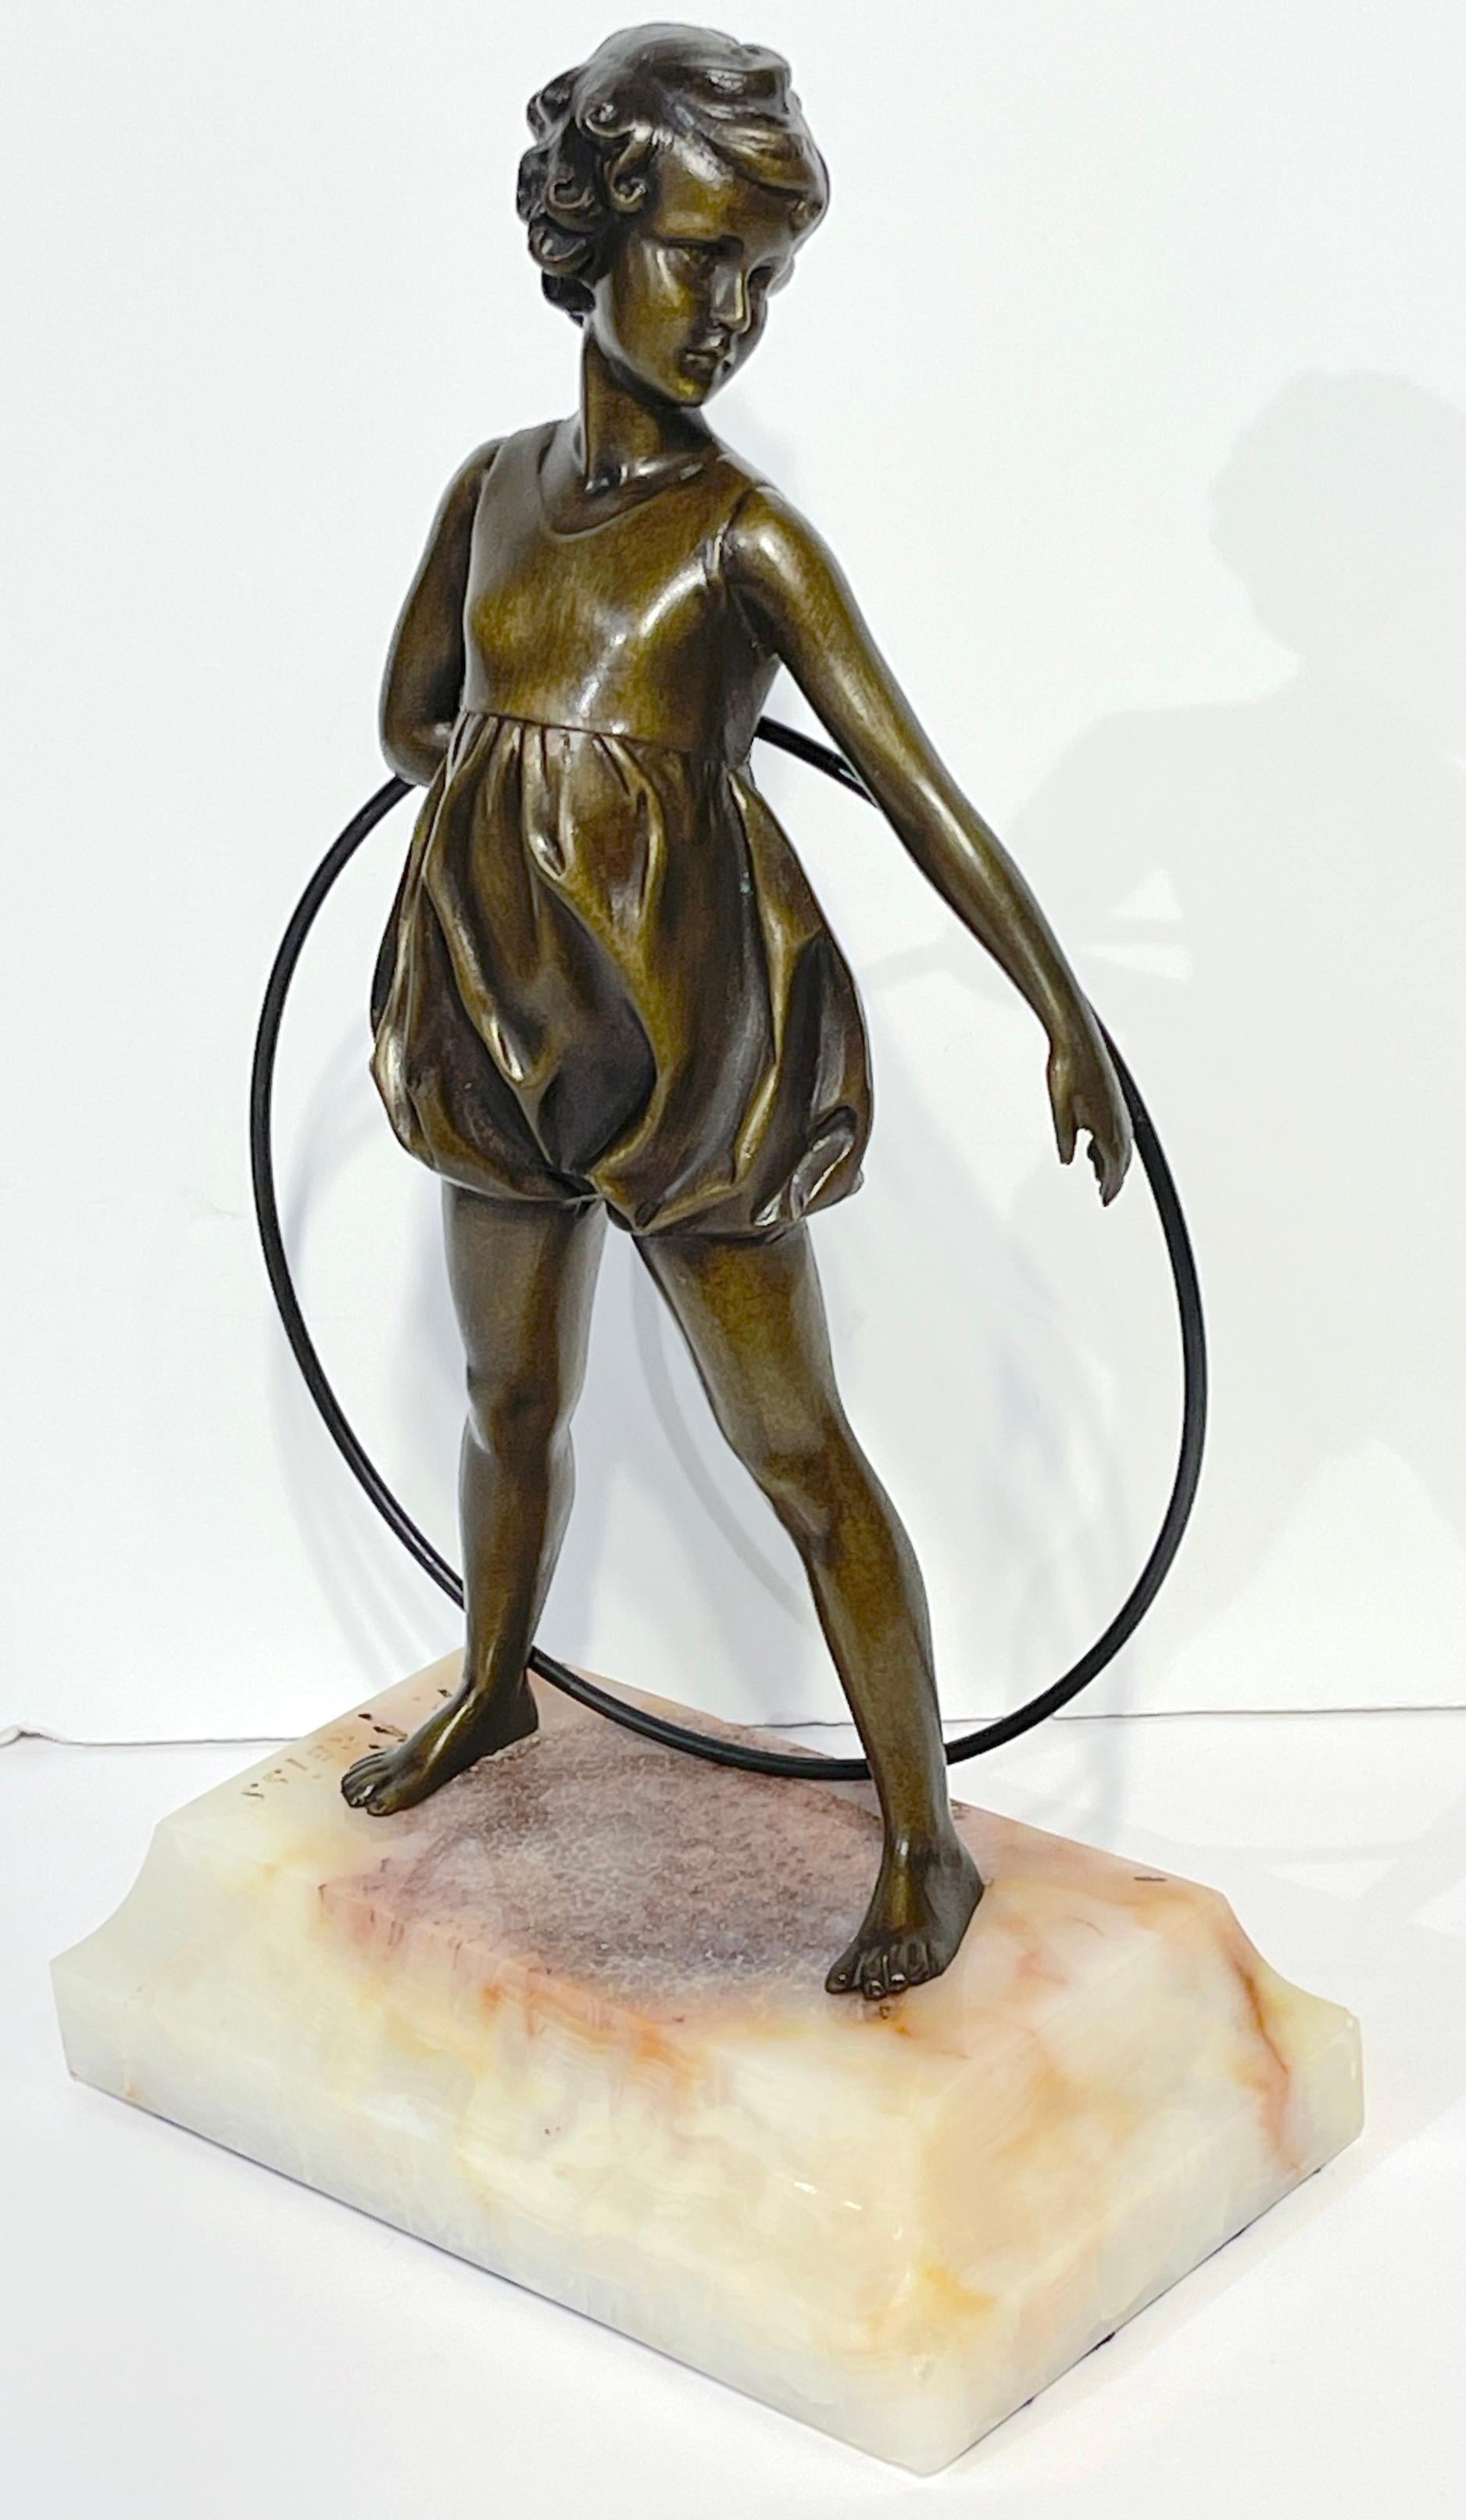 'Hoop Girl'  Art Deco Bronze Sculpture Signed Ferdinand Preiss (1882-1943)
Germany, Circa 1920's

We are pleased to offer  the 'Hoop Girl' Art Deco Bronze Sculpture, a signed work by Ferdinand Preiss (1882-1943), originating from Germany circa